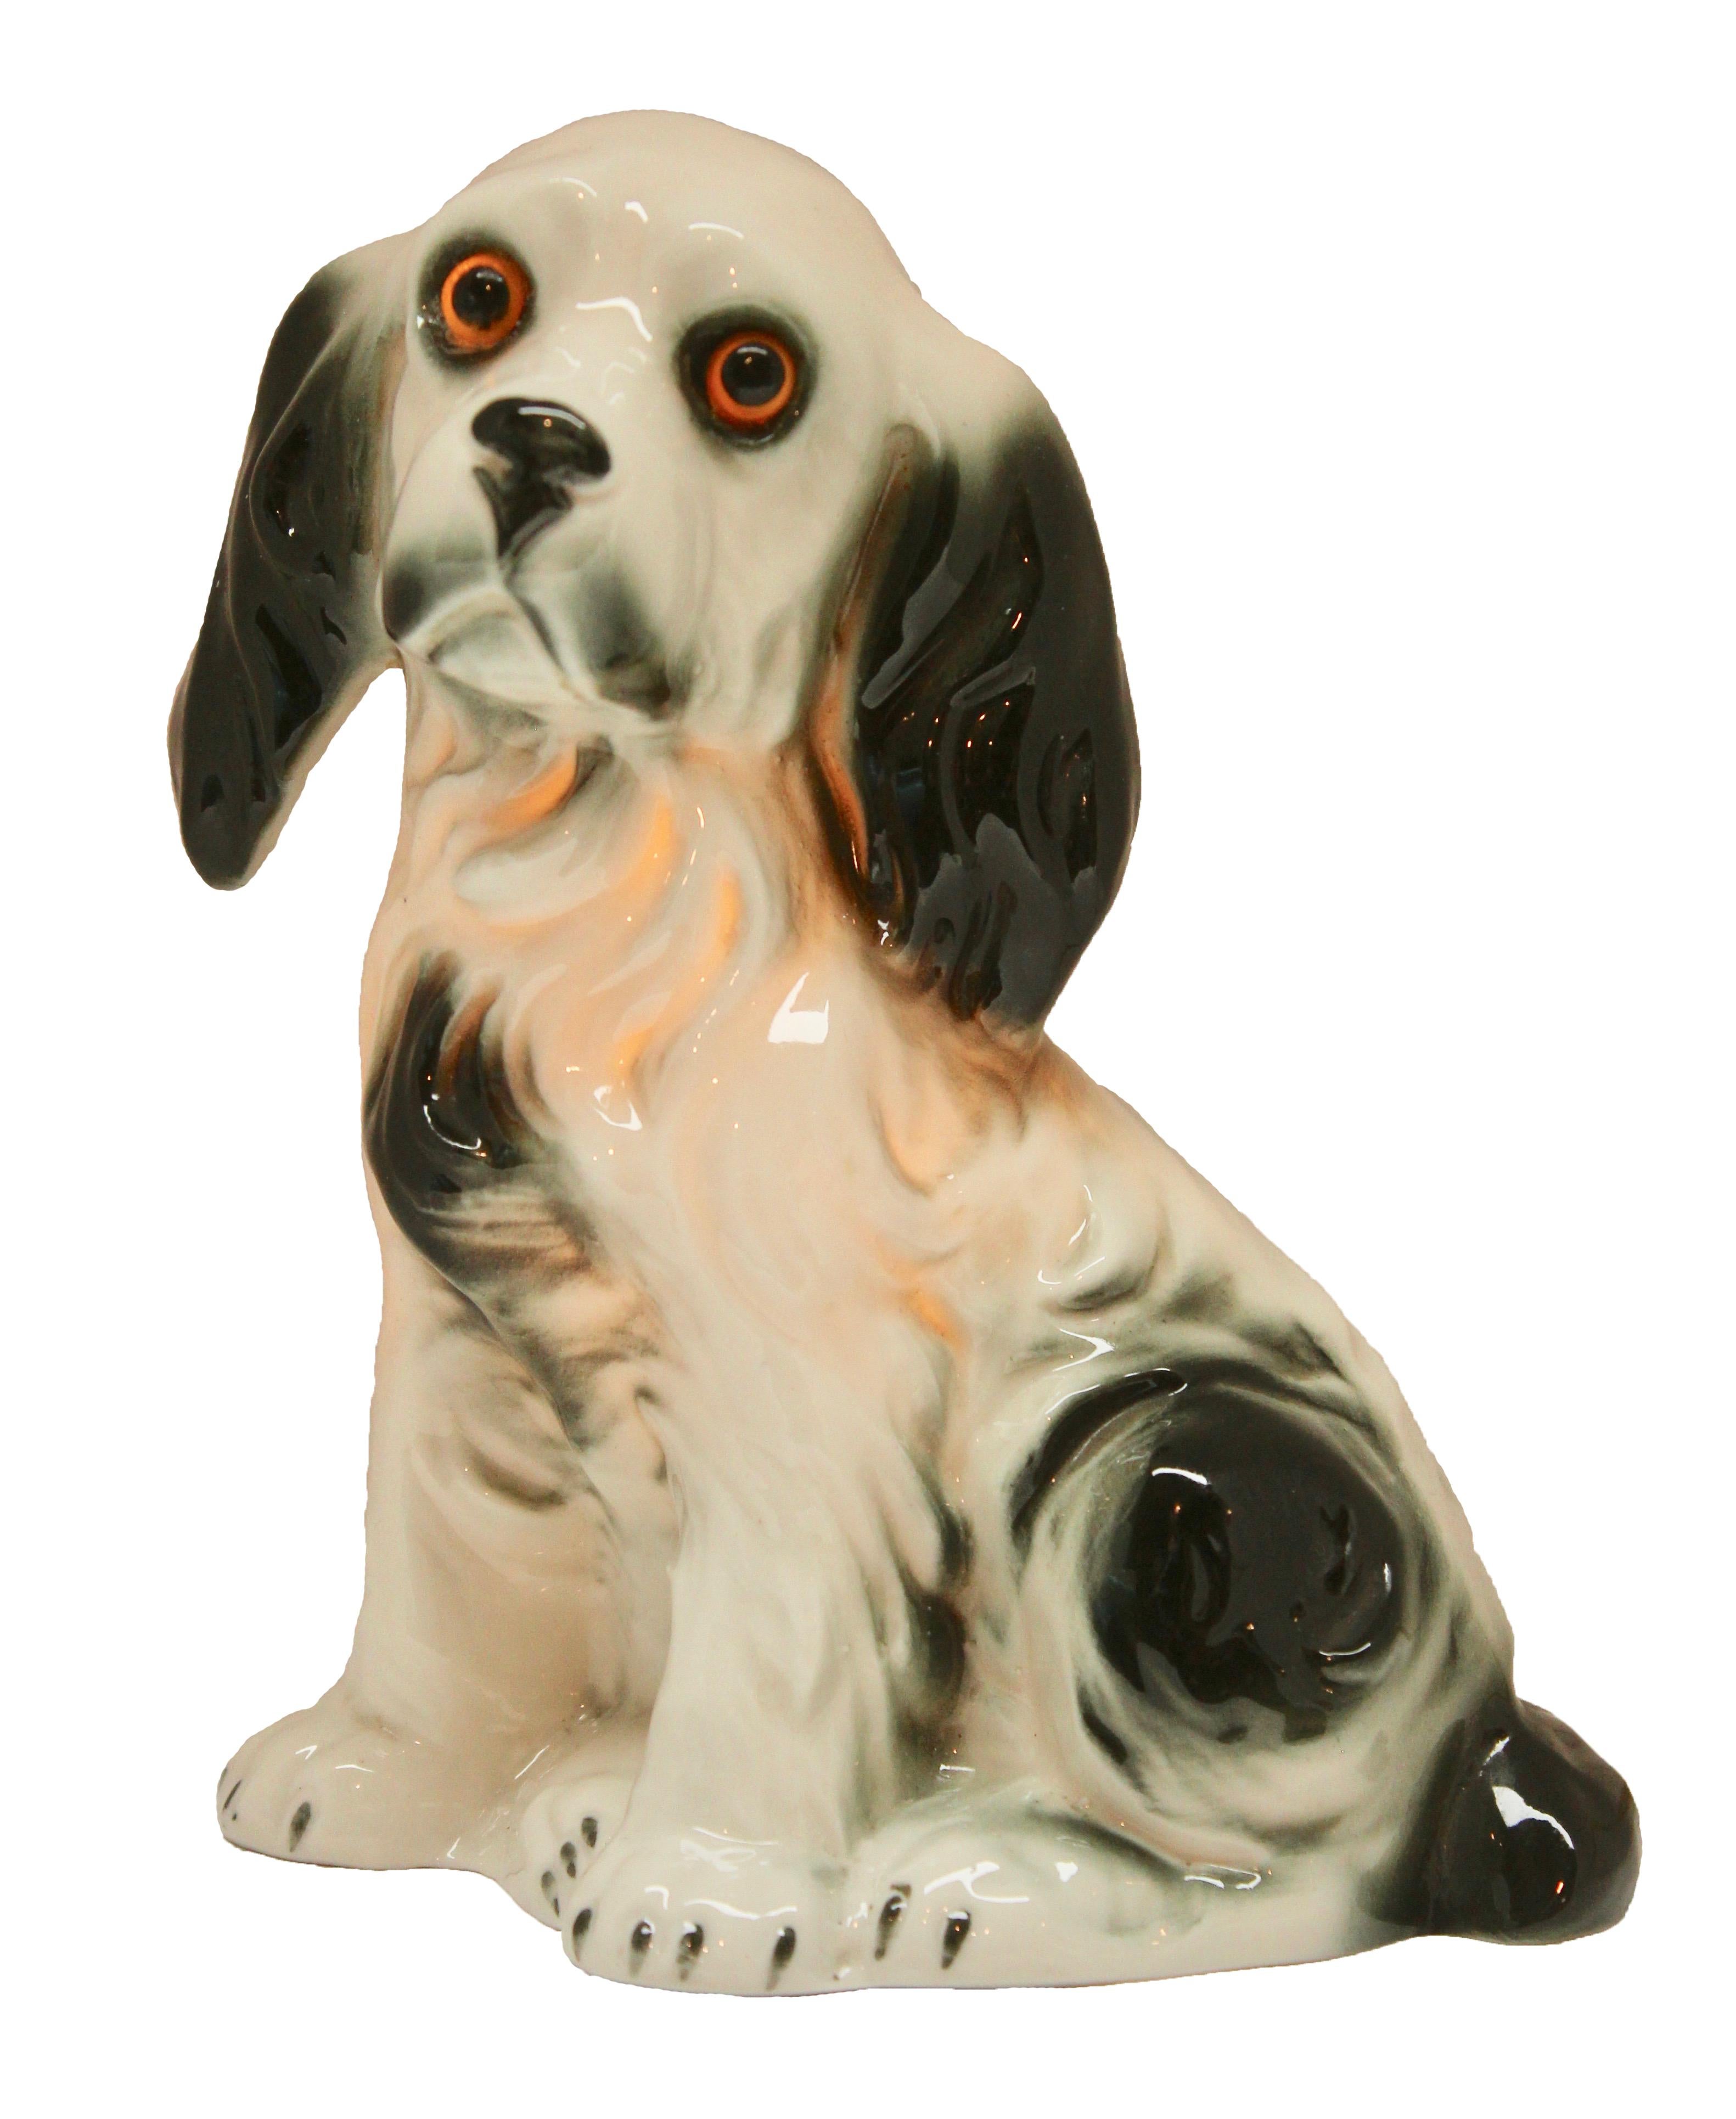 Rare and gorgeous dog perfume lamp attributed to Carl Scheidig Grafenthal, Germany.
Excellent condition, lamp is in working order.
Size: Height 17 cm, 6.7 inch, width 13 cm, 5.11 inch.
Germany, 1930s, excellent condition
Porcelain figurine / air